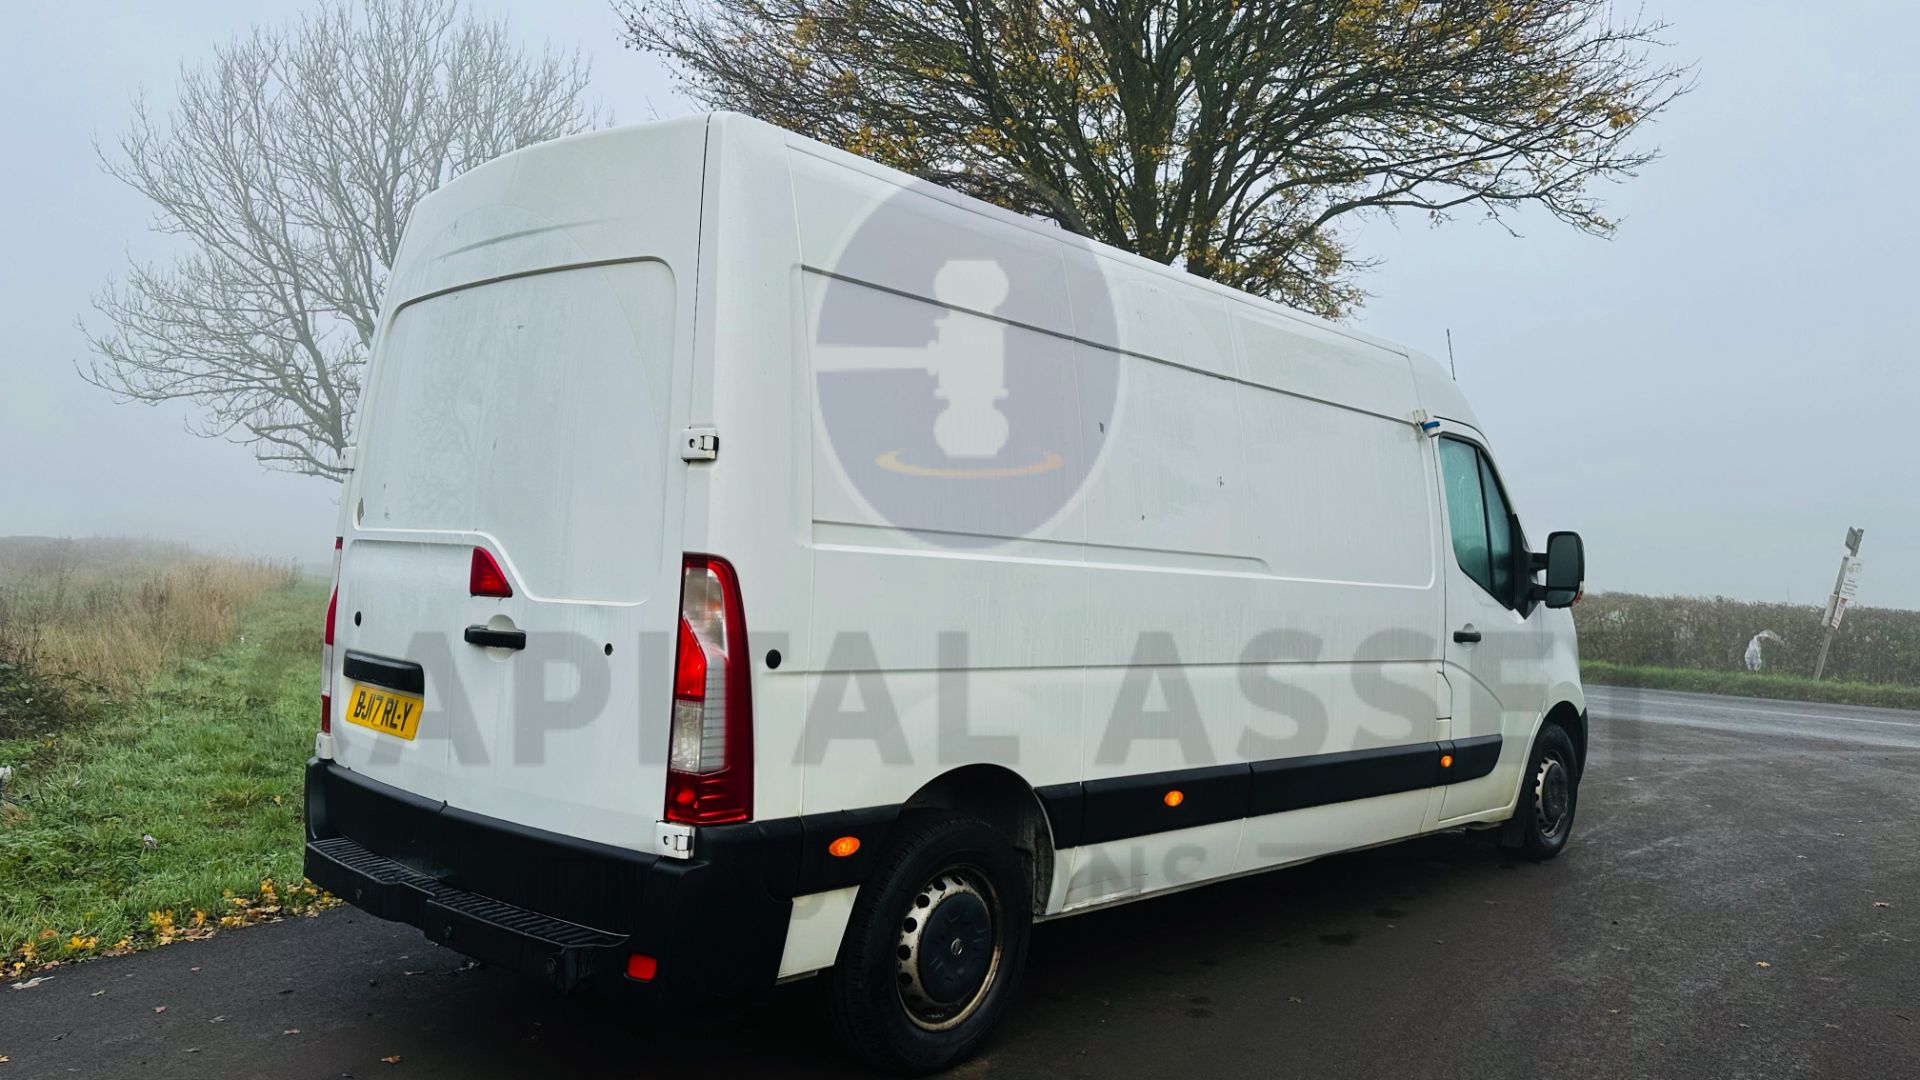 (ON SALE) NISSAN NV400 *LWB - REFRIGERATED VAN* (2017 - EURO 6) 2.3 DCI (3500 KG) *1 OWNER FROM NEW* - Image 12 of 40